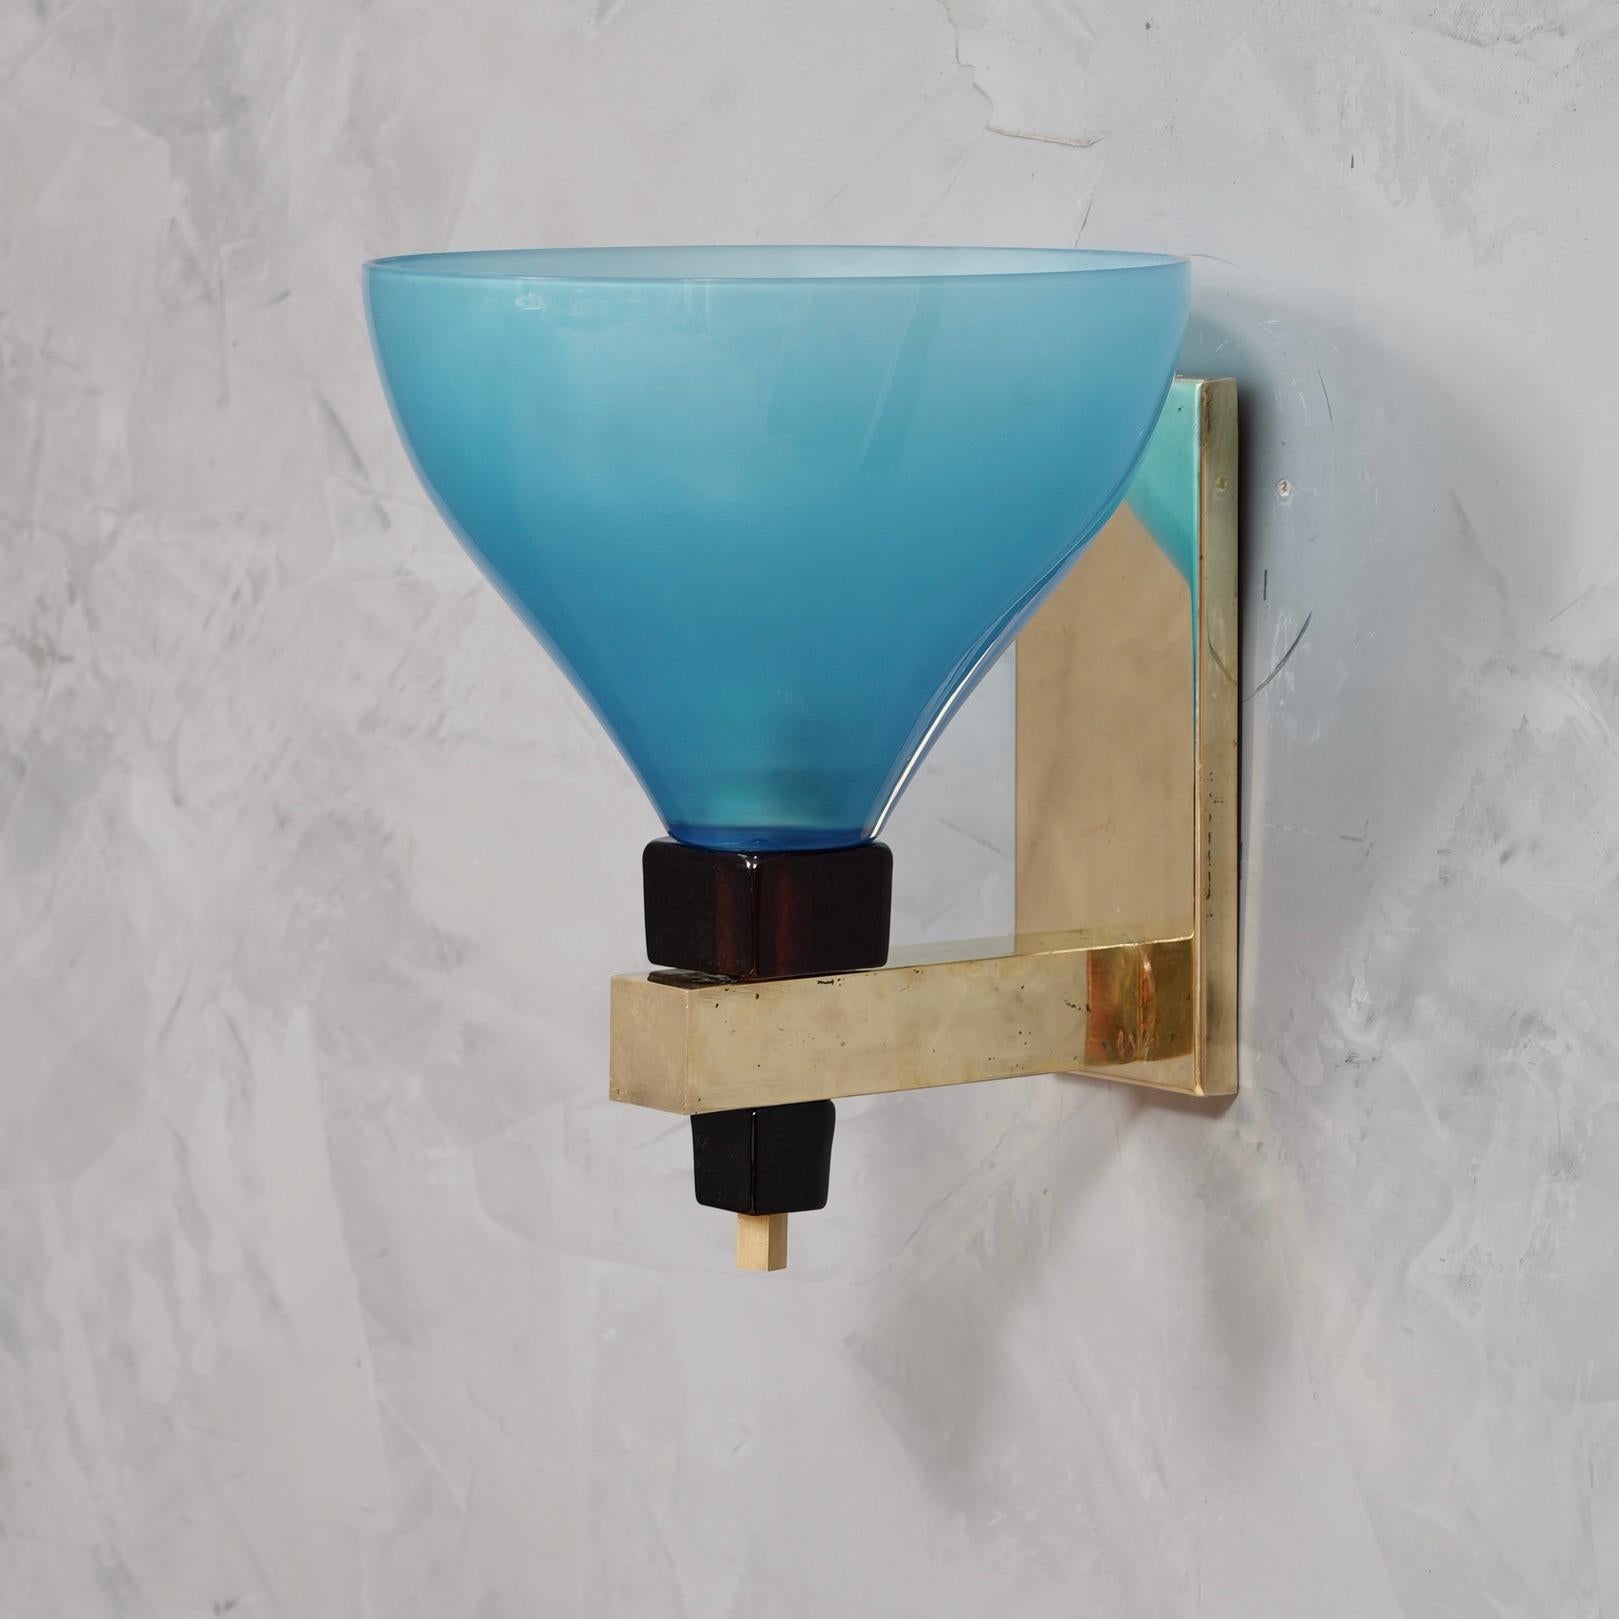 Wonderful Murano glass wall lamp in the style of Vistosi. Simple but very elegant design. Exaggeratedly bright blue, a bright and intense color reminiscent of a tropical sea.

The applique are composed of a brass frame, which houses a large blue